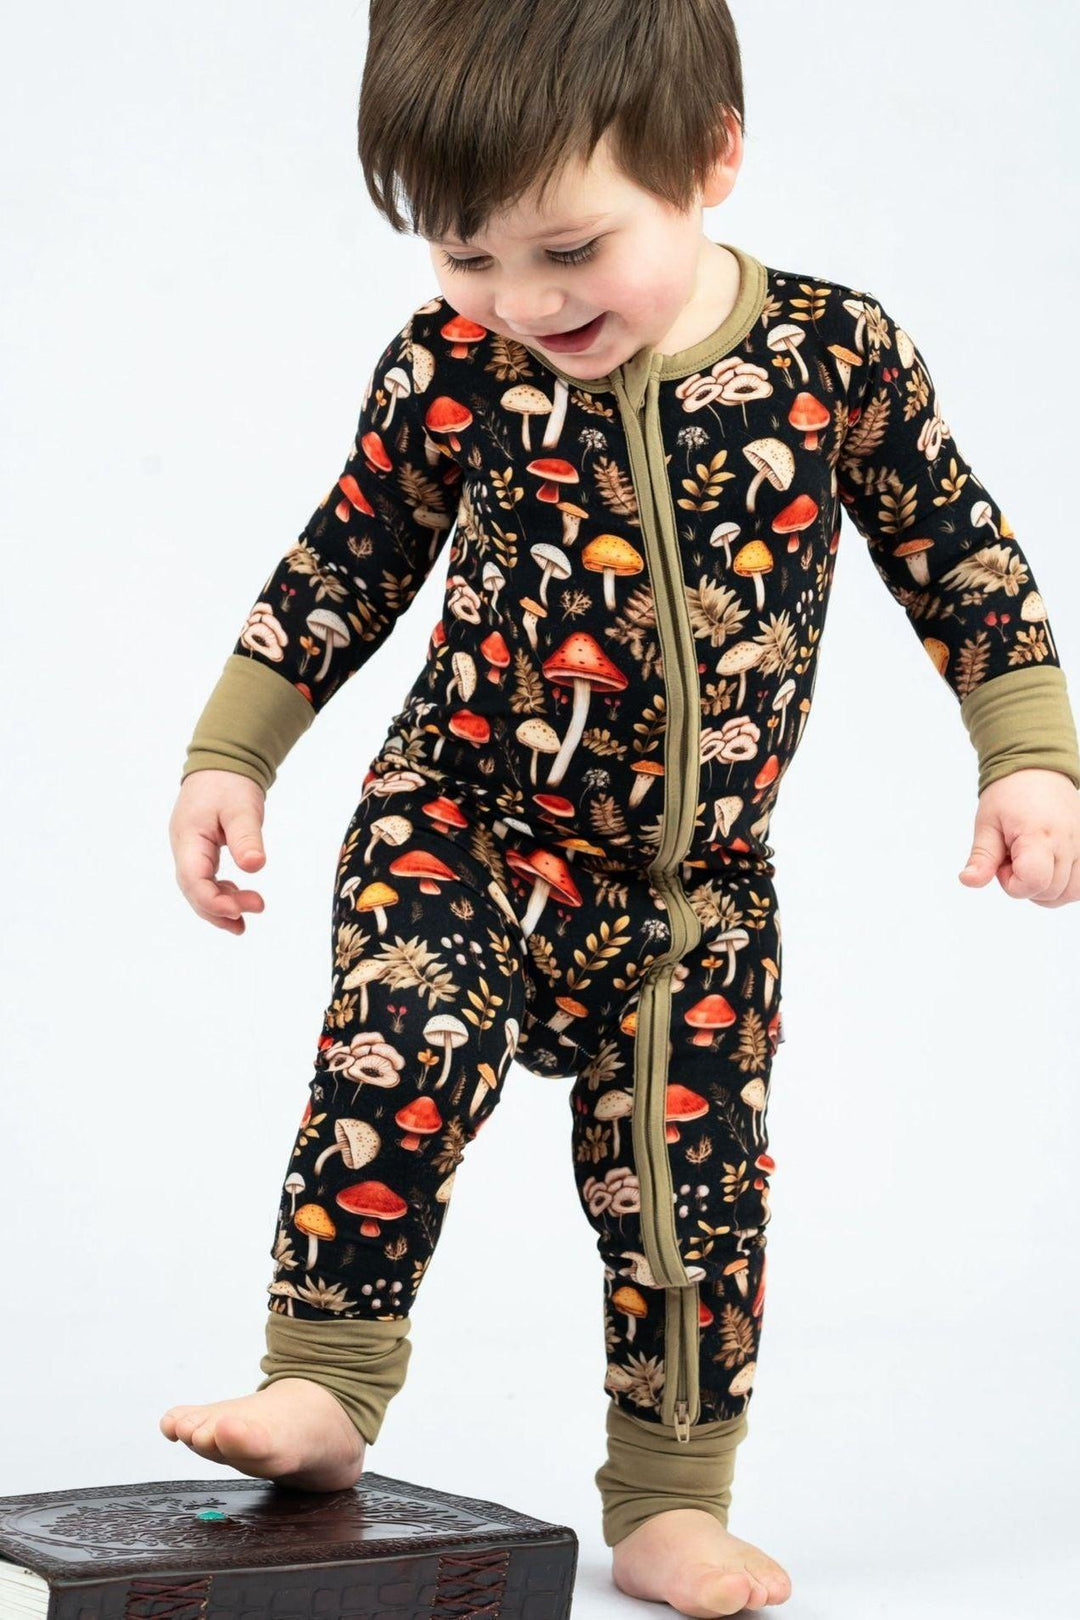 Toadstool Tales, Mushroom Print Unisex Zip Up Pajamas for Baby and Toddler - Sophia Rose Children's Boutique